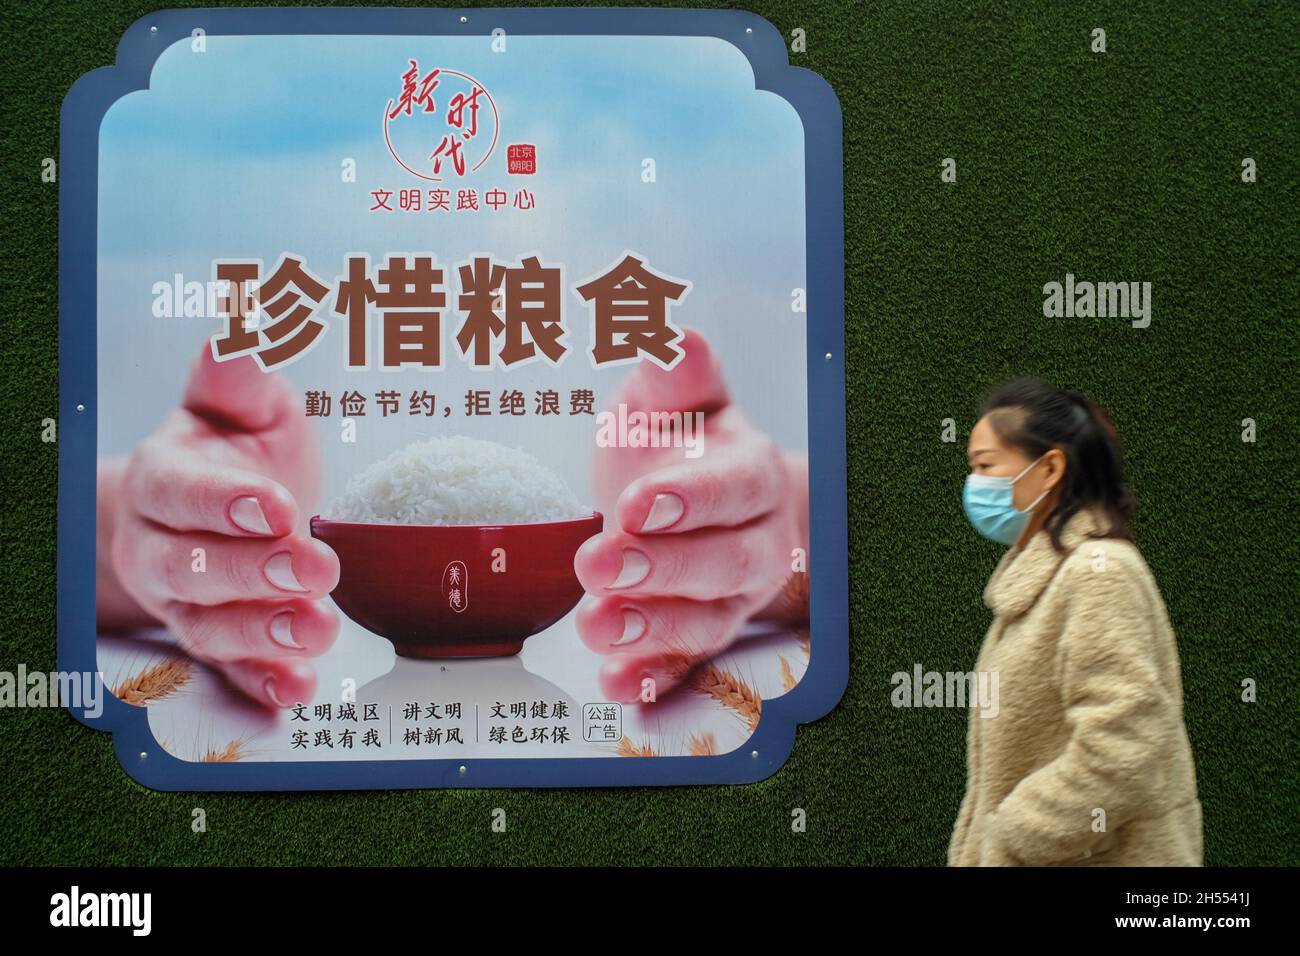 A woman passes a billboard with the theme of 'Cherishing food' in Beijing, China. 06-Nov-2021 Stock Photo